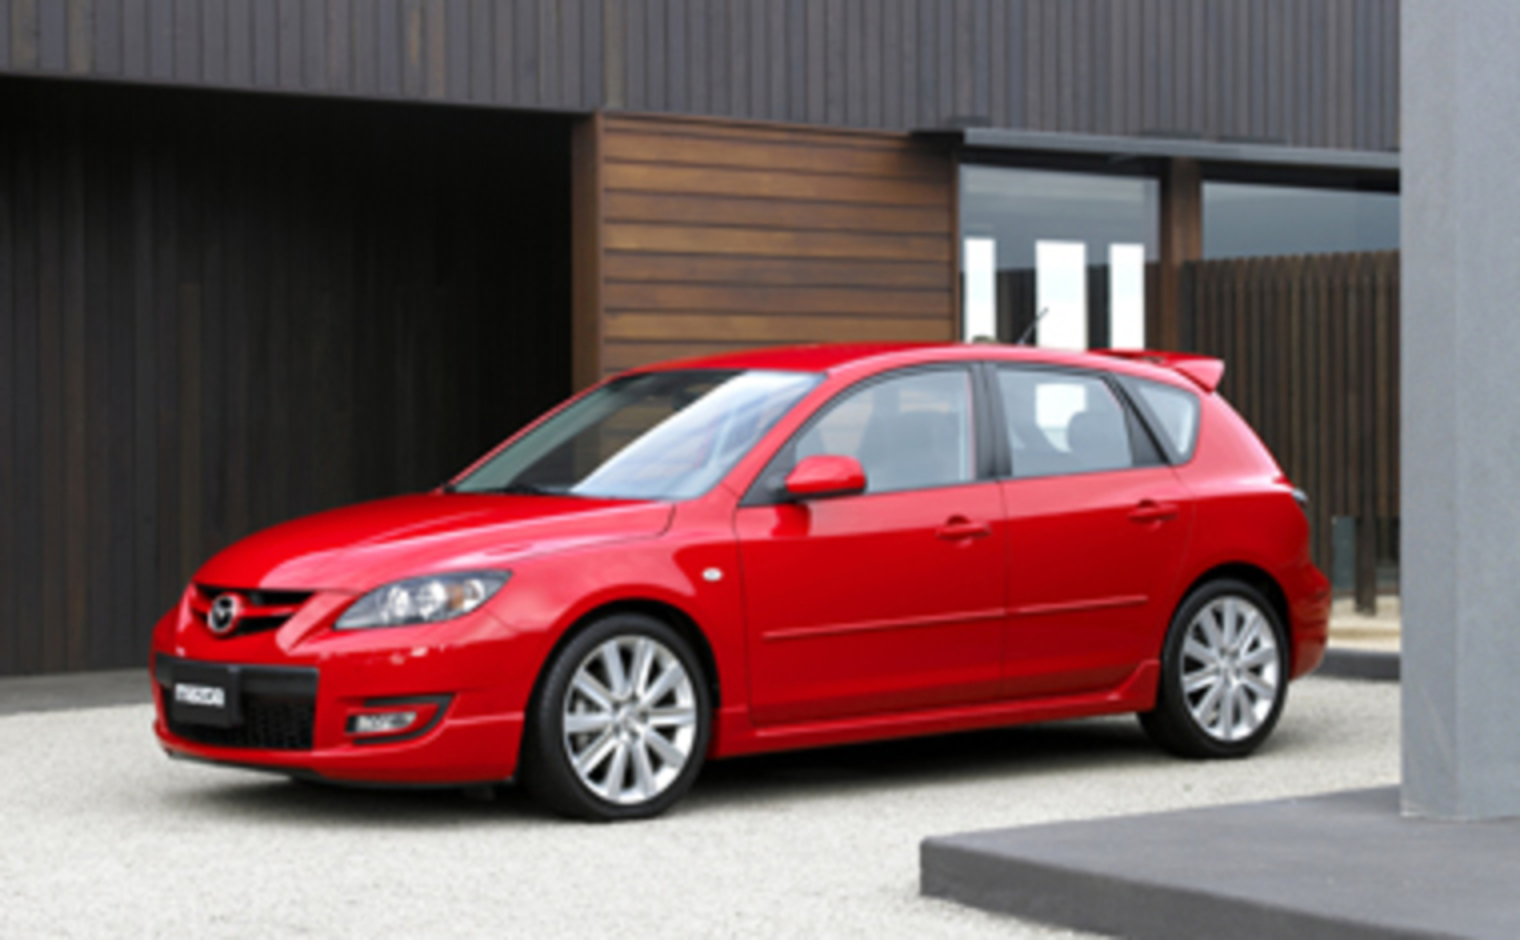 Mazda 3 Hatchback. View Download Wallpaper. 380x235. Comments